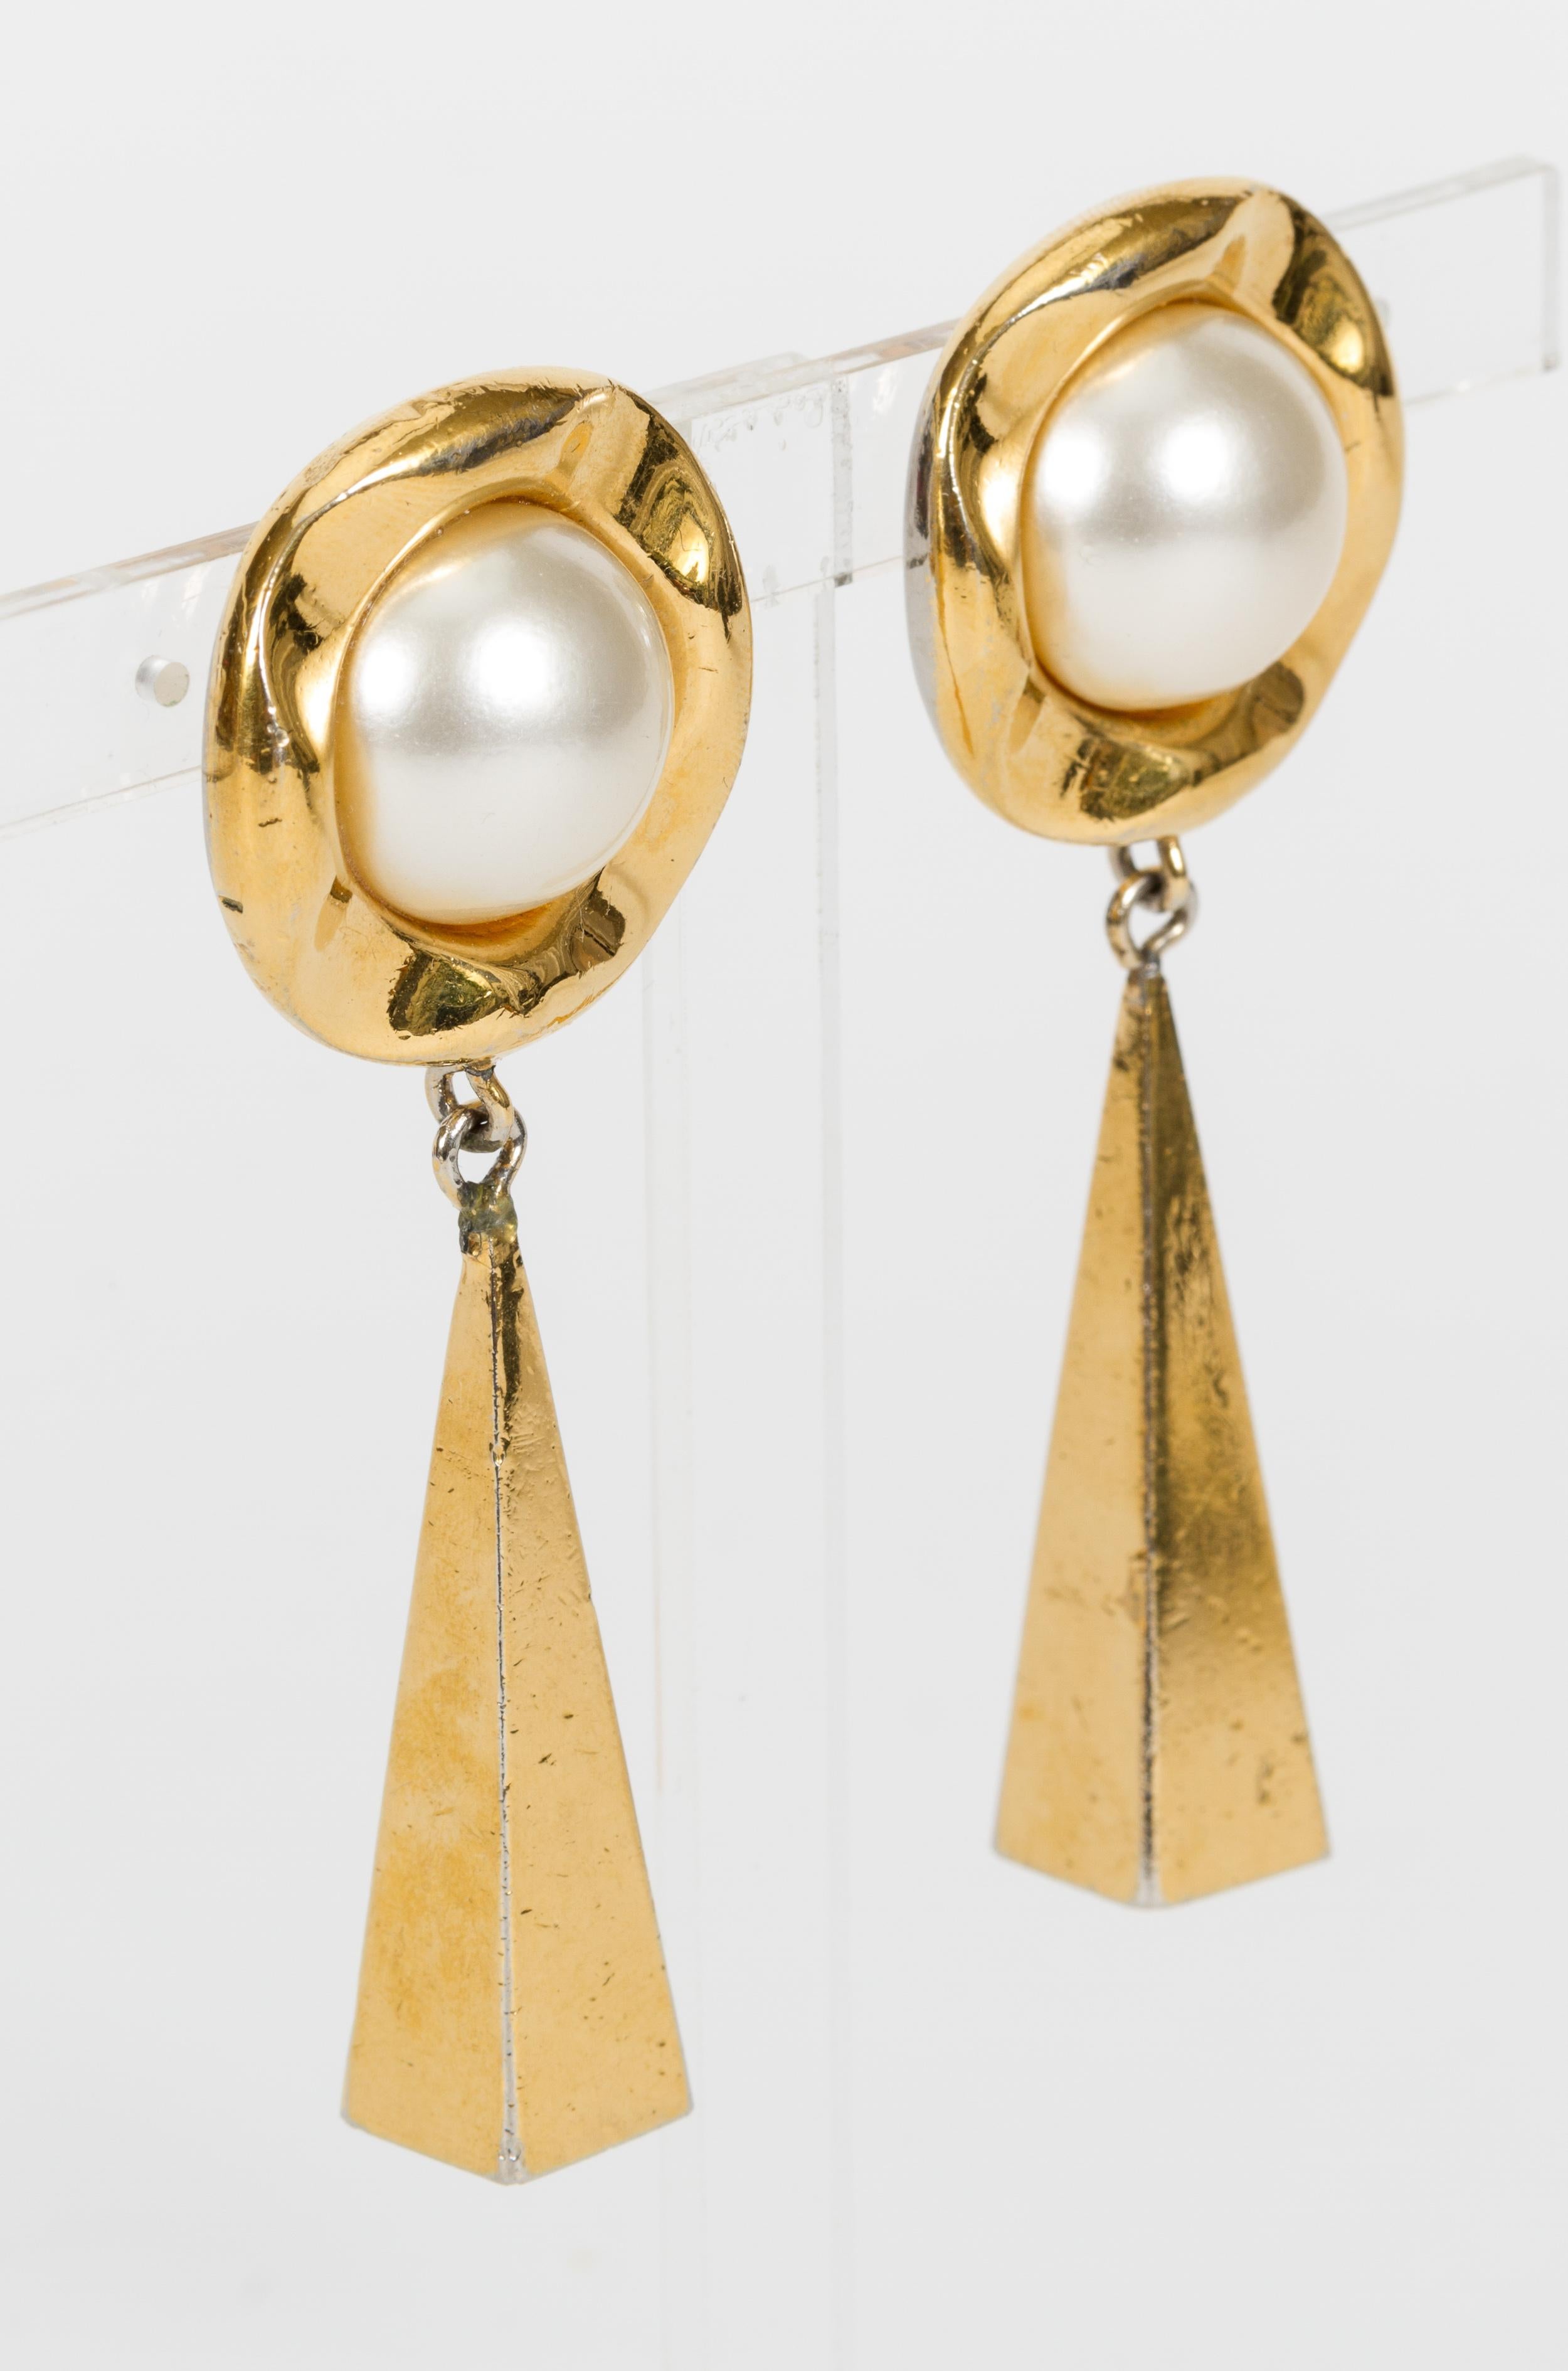 Chanel long golden pearl drop earrings. 1970s. Comes with a original pouch or box.